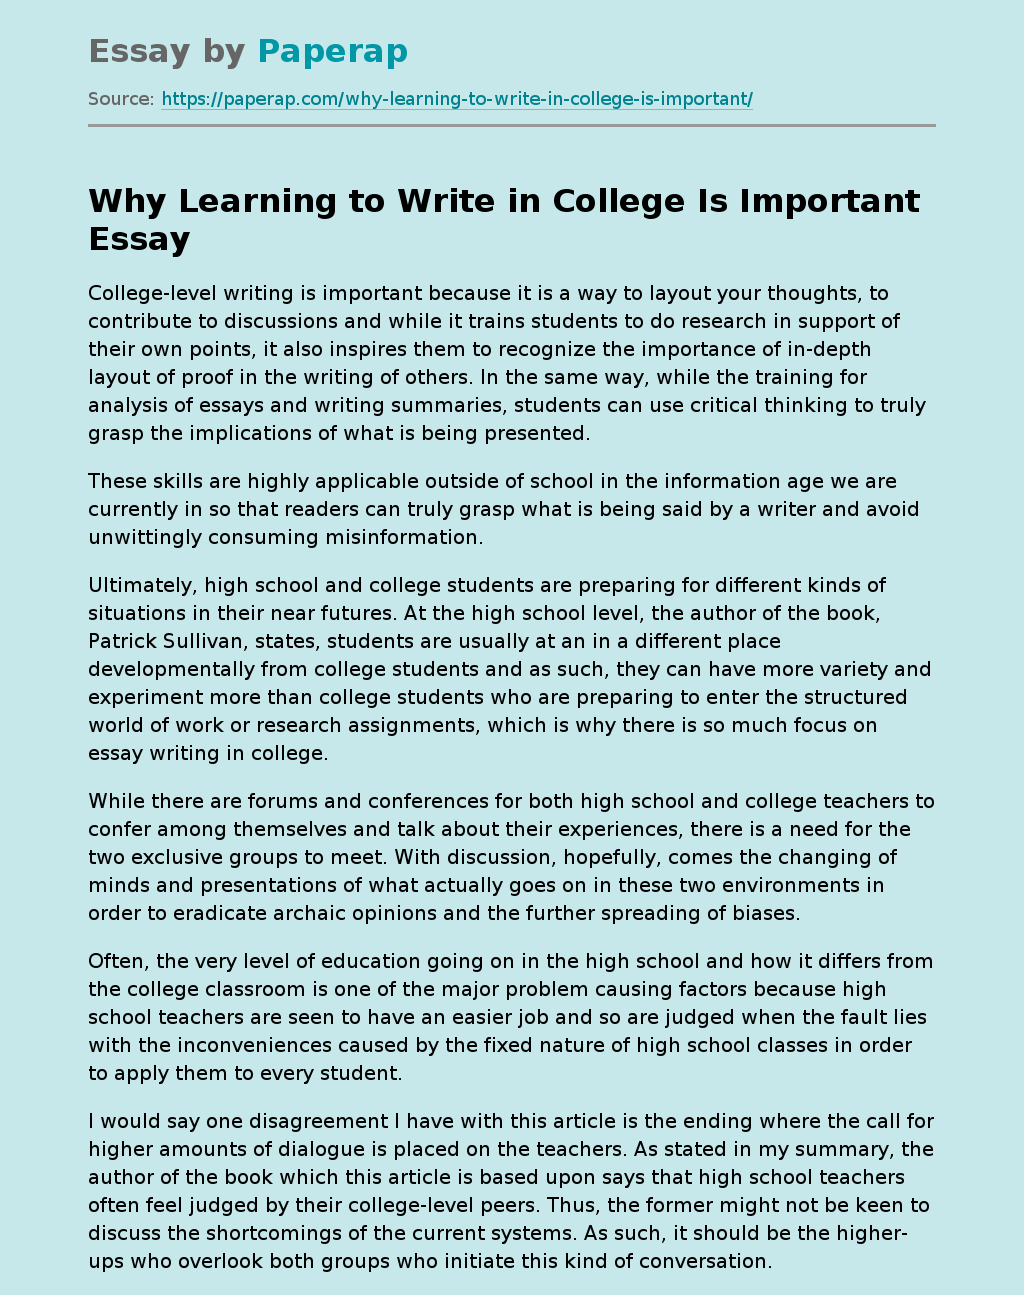 Why Learning to Write in College Is Important